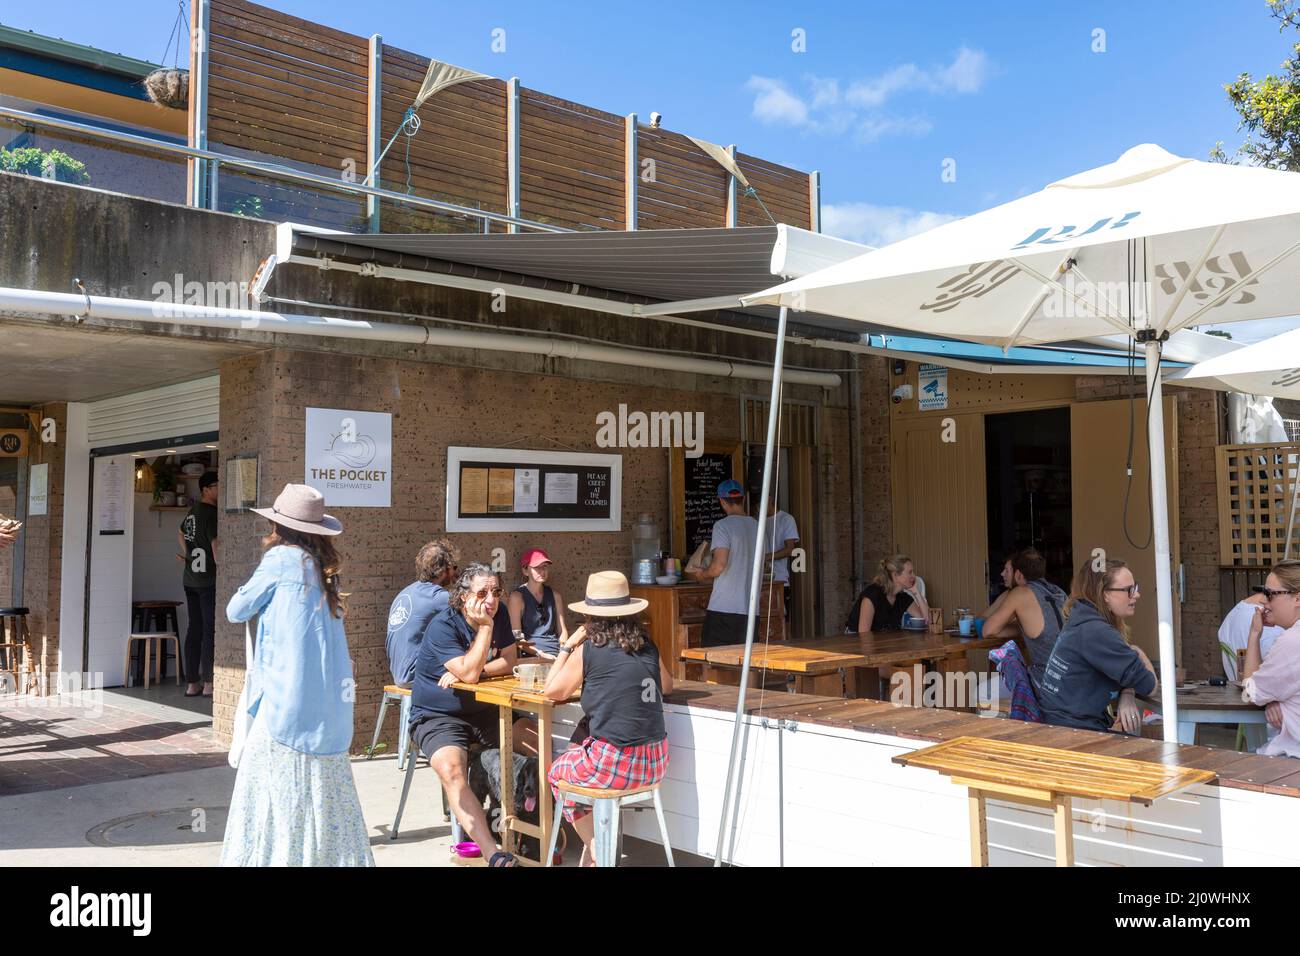 The Pocket cafe and restaurant at Freshwater Beach in Sydney, NSW,Australia  on a sunny autumnal day Stock Photo - Alamy